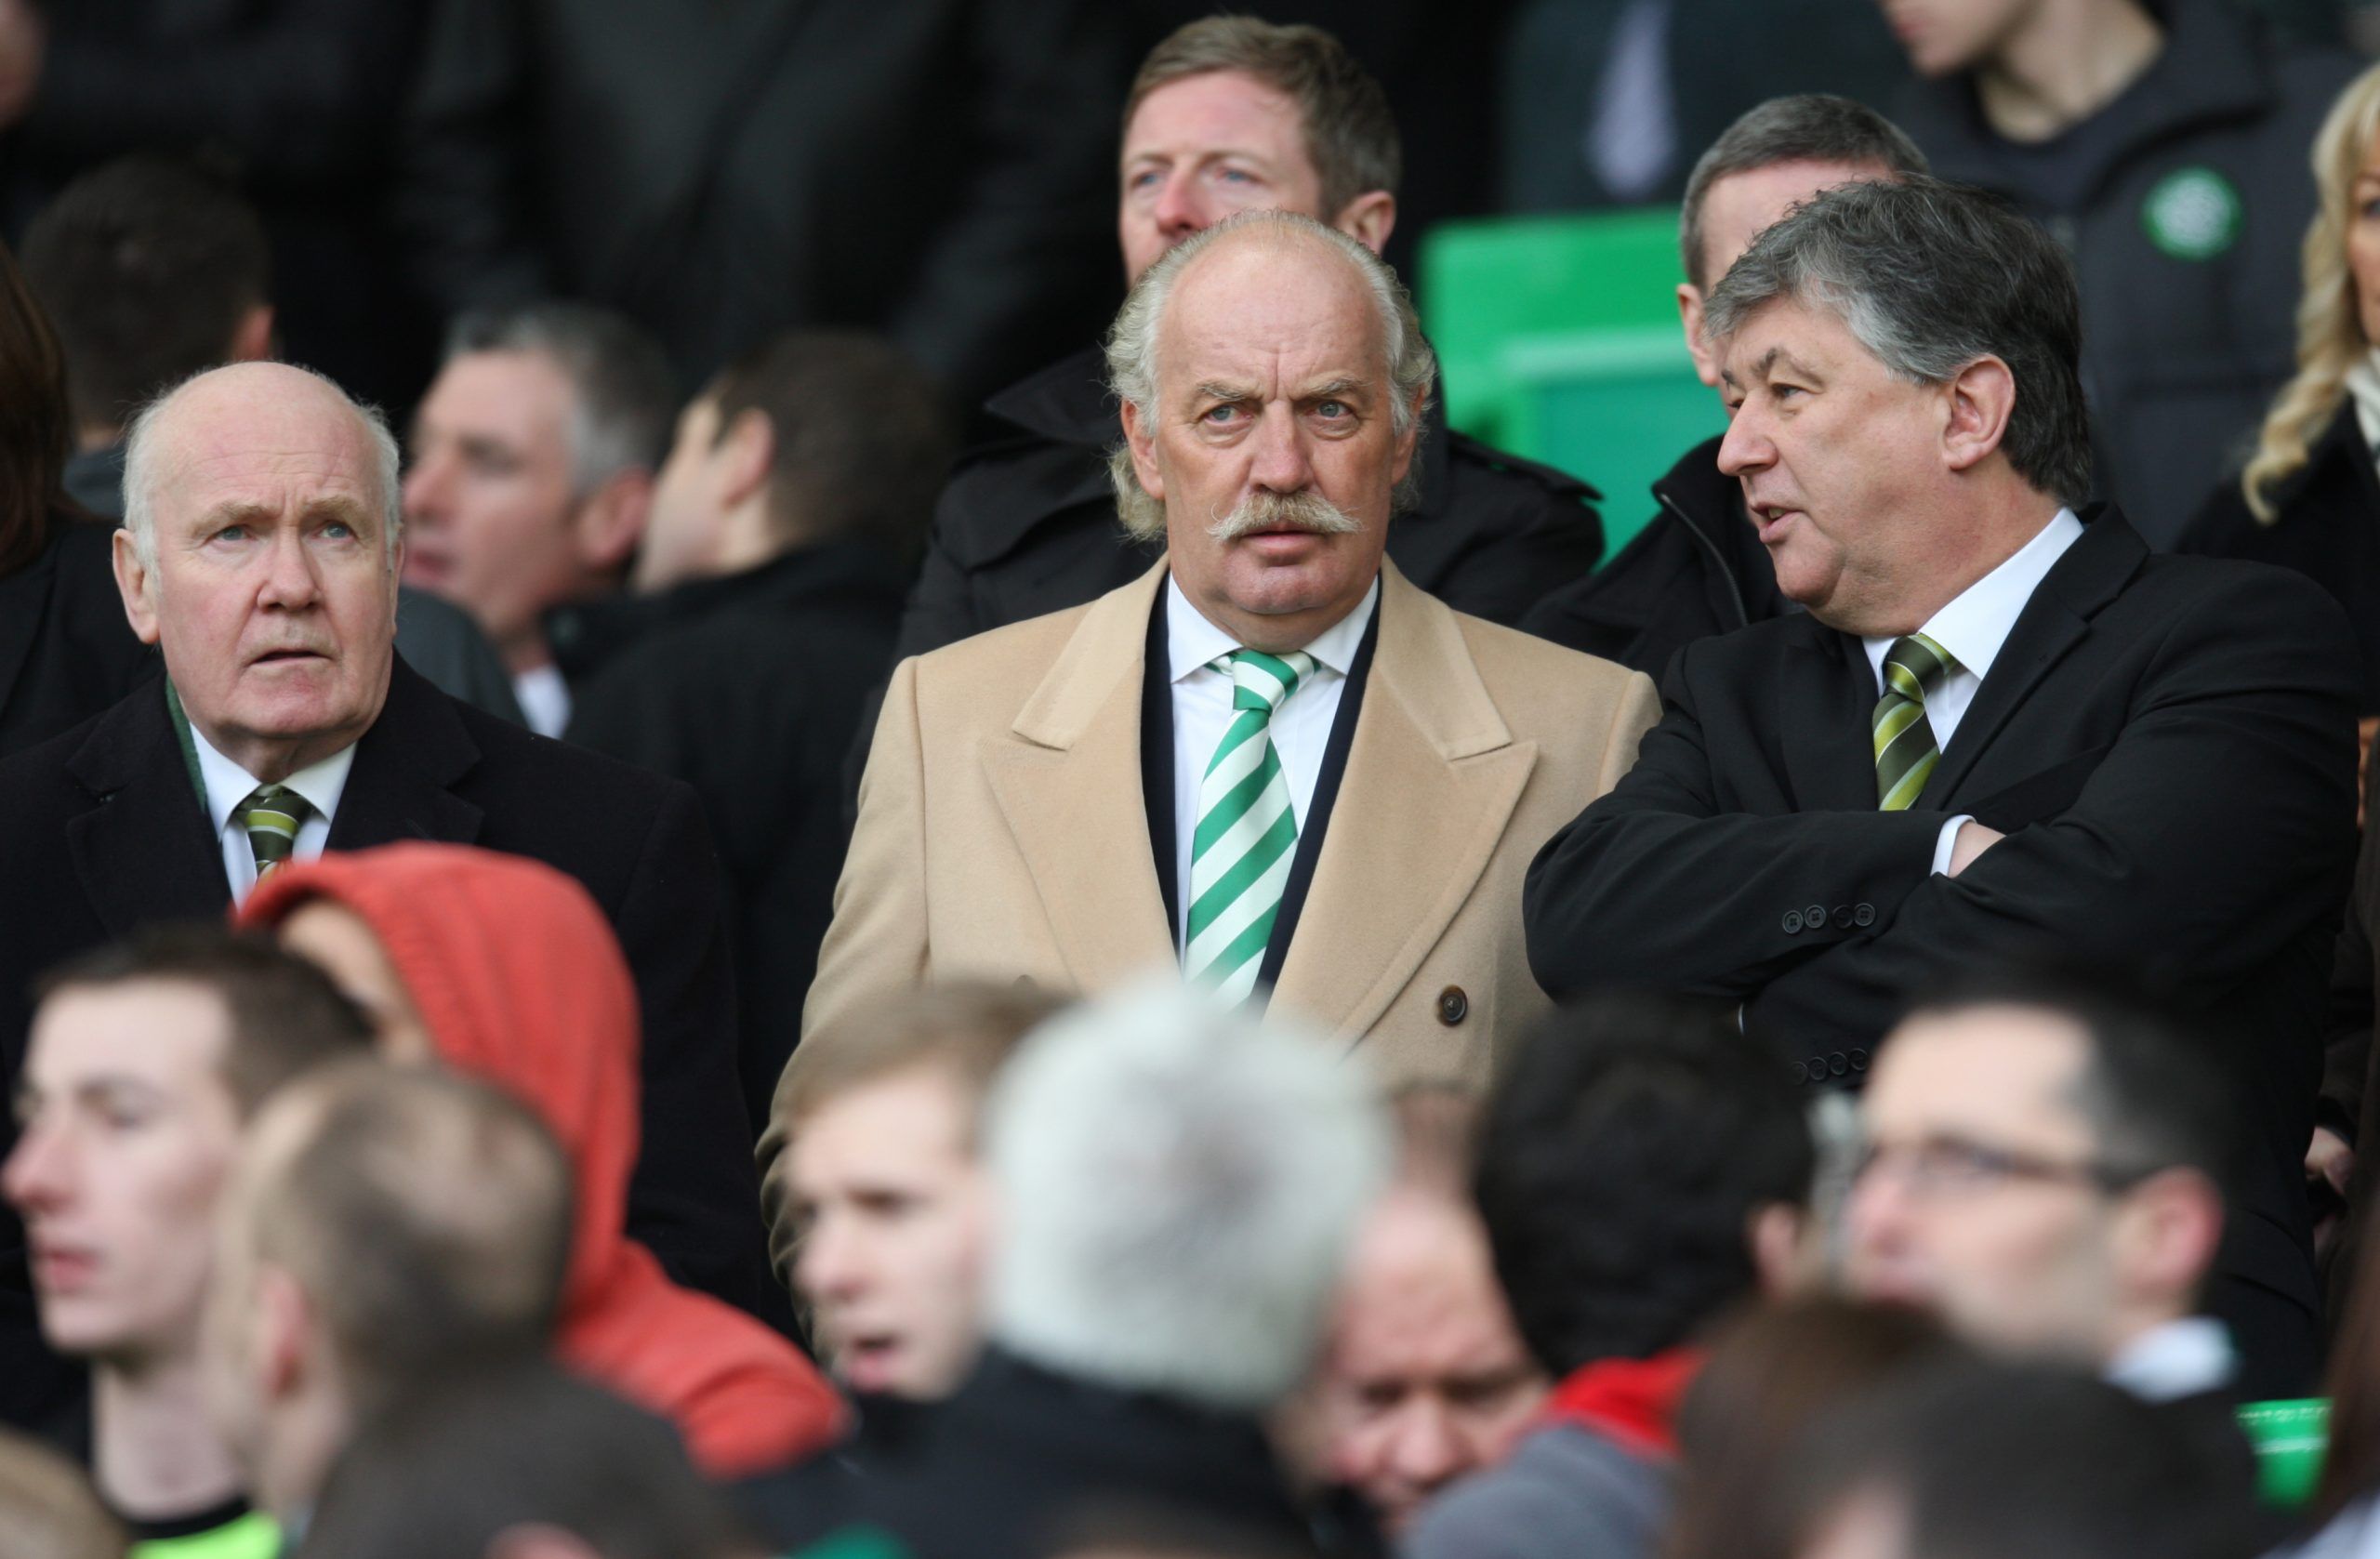 Football - Celtic v Rangers - Clydesdale Bank Scottish Premier League - Celtic Park - 10/11 - 20/2/11 
(L-R) - Celtic Chairman Dr John Reid, Independent Non Executive Director Dermot Desmond and Chief Executive Peter Lawwell in the stands 
Mandatory Credit: Action Images / Carl Recine